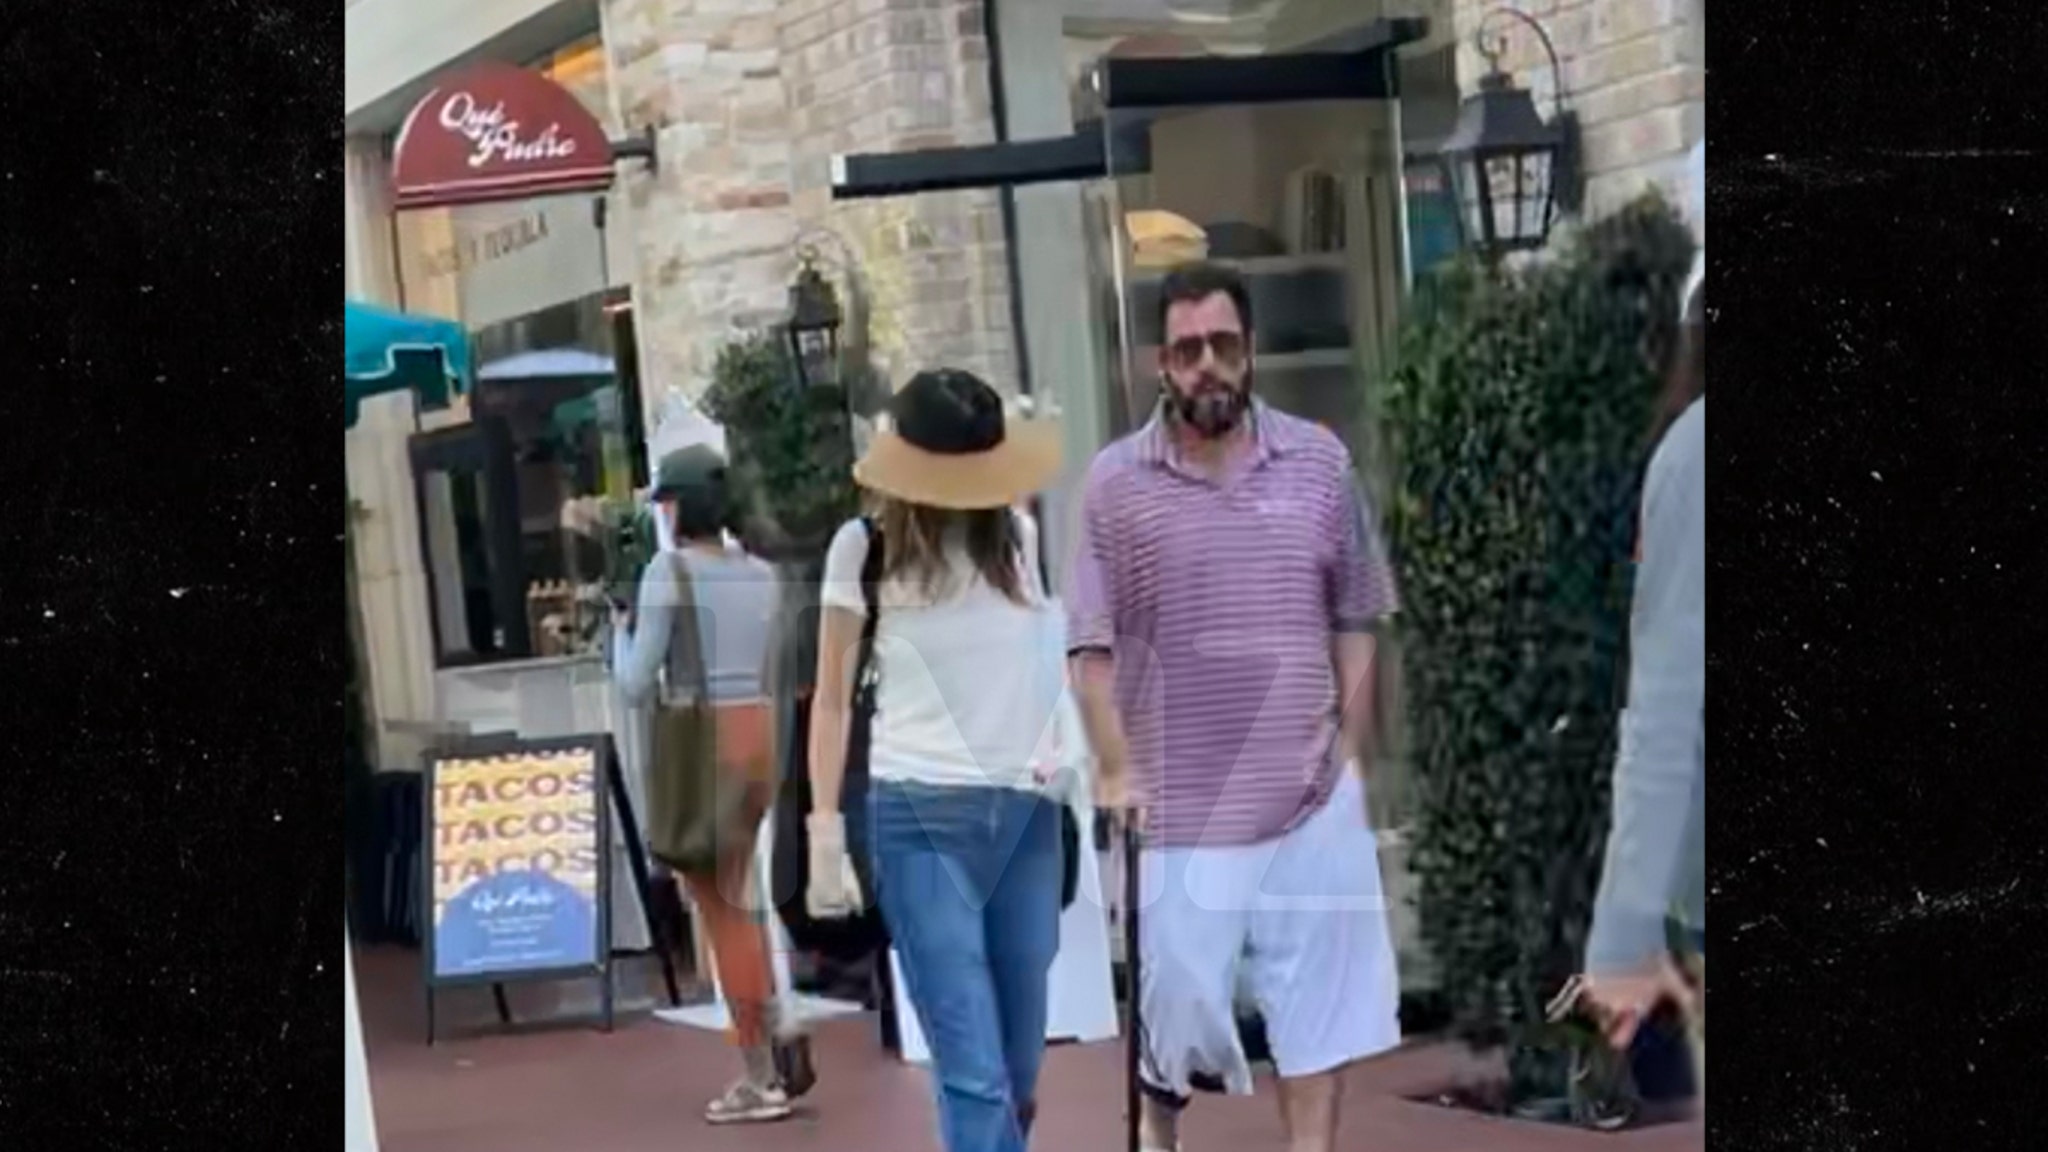 Adam Sandler uses the cane while recovering from hip surgery